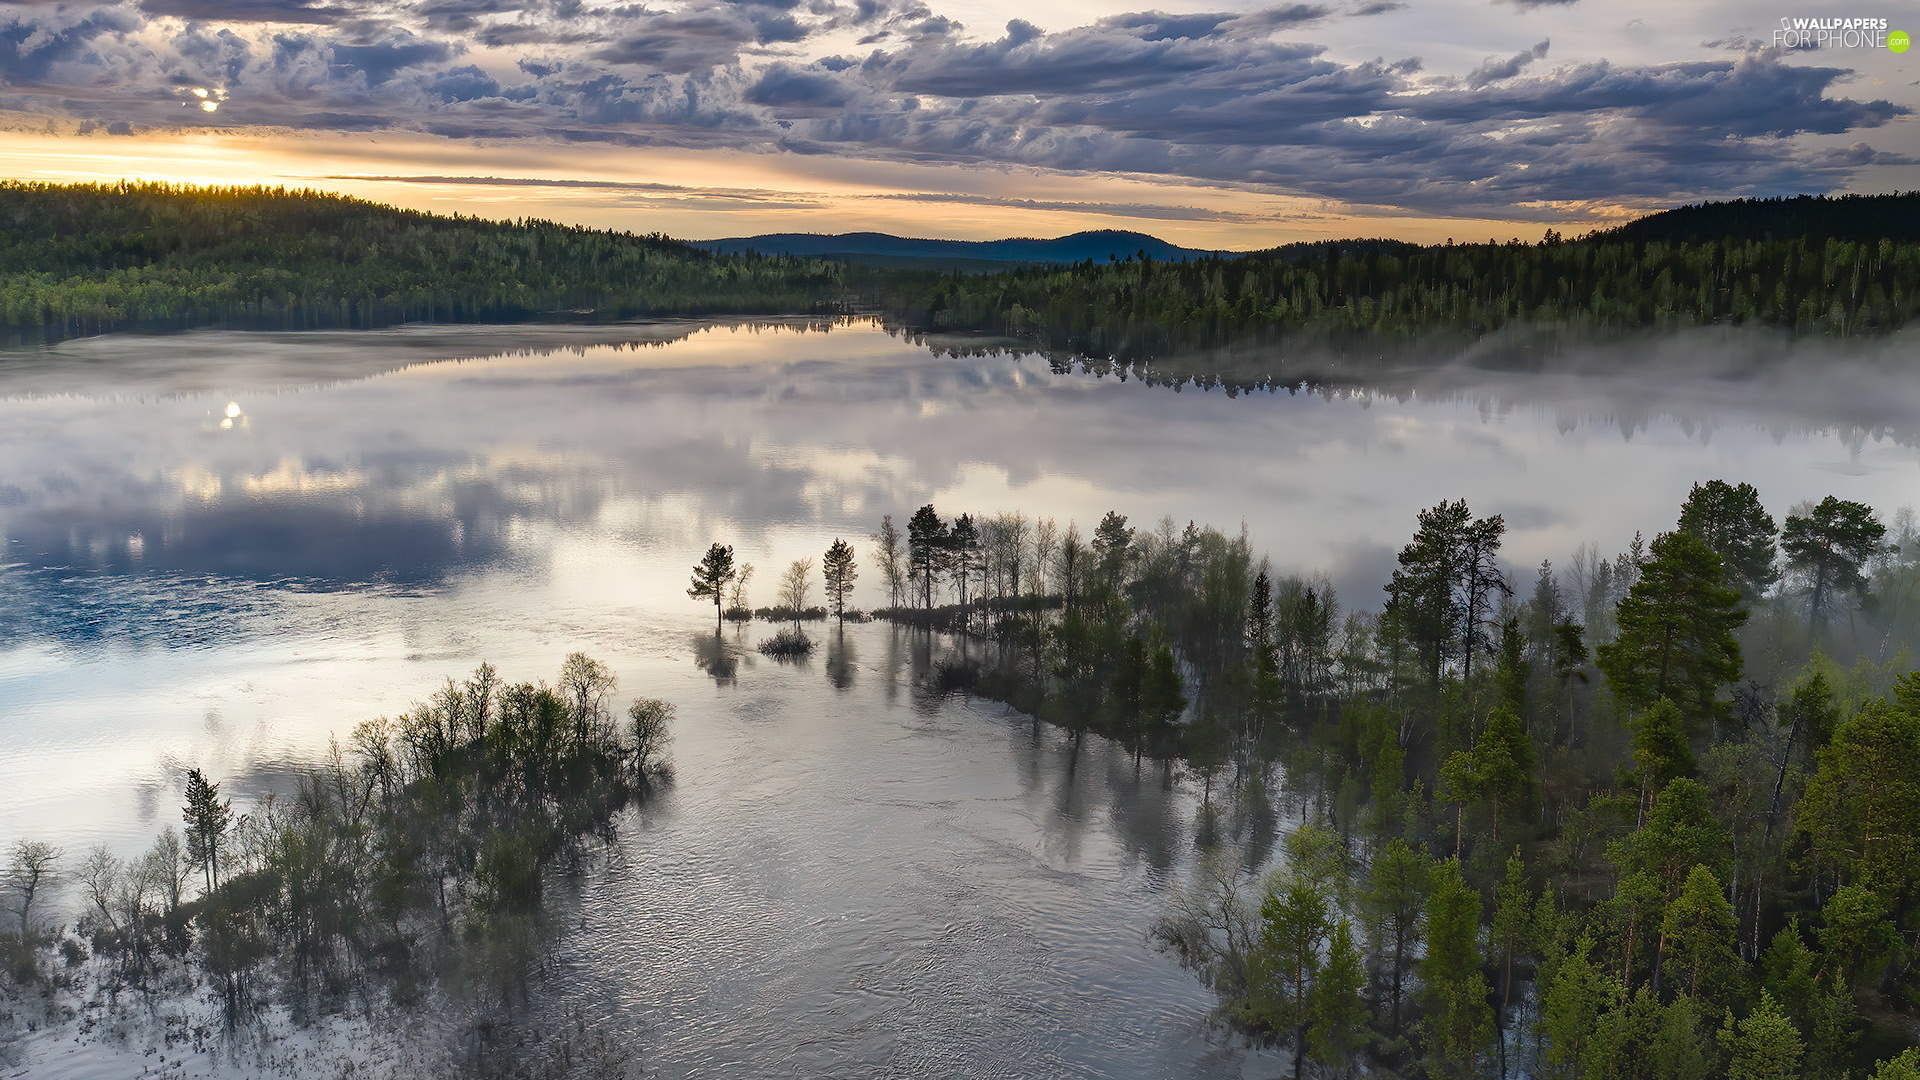 Finland: Lapland, Inari Lake, Green belt, Middle of nowhere. 1920x1080 Full HD Wallpaper.